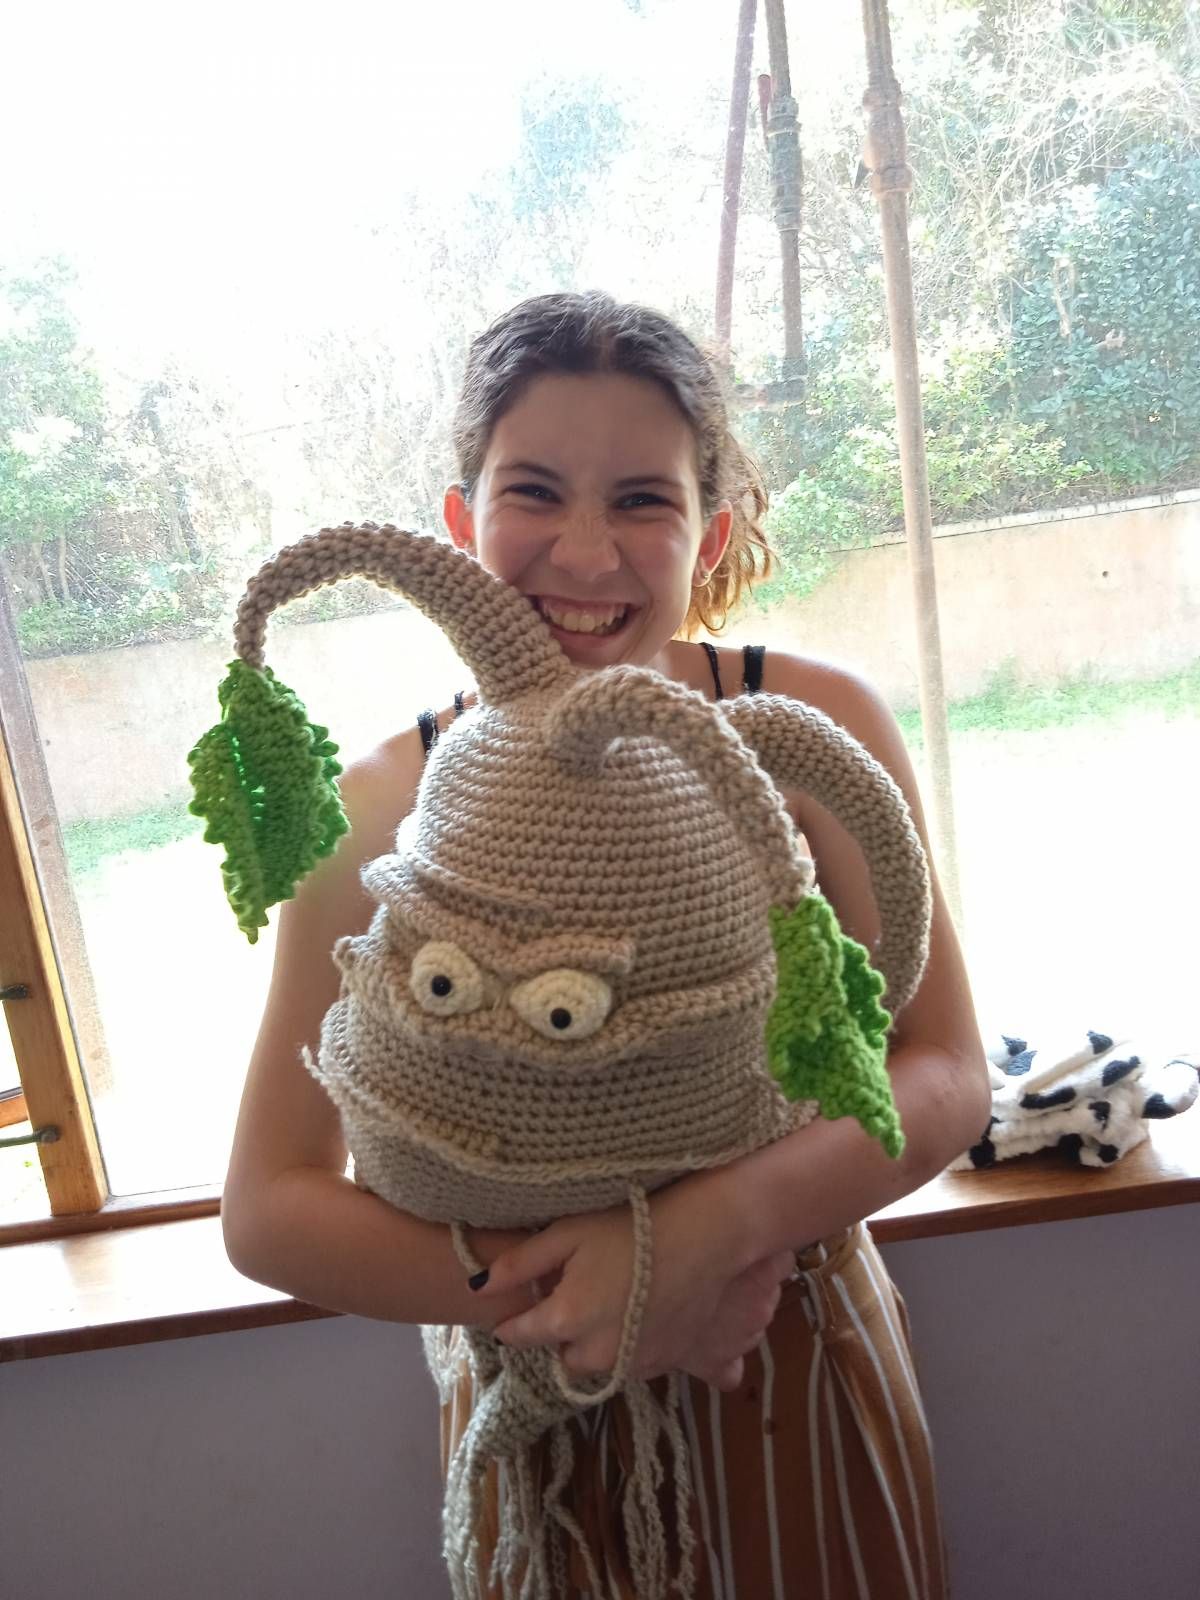 Amigurumi Crochet Mandrake Review by Catherine Jordan for Cottontail Whiskers